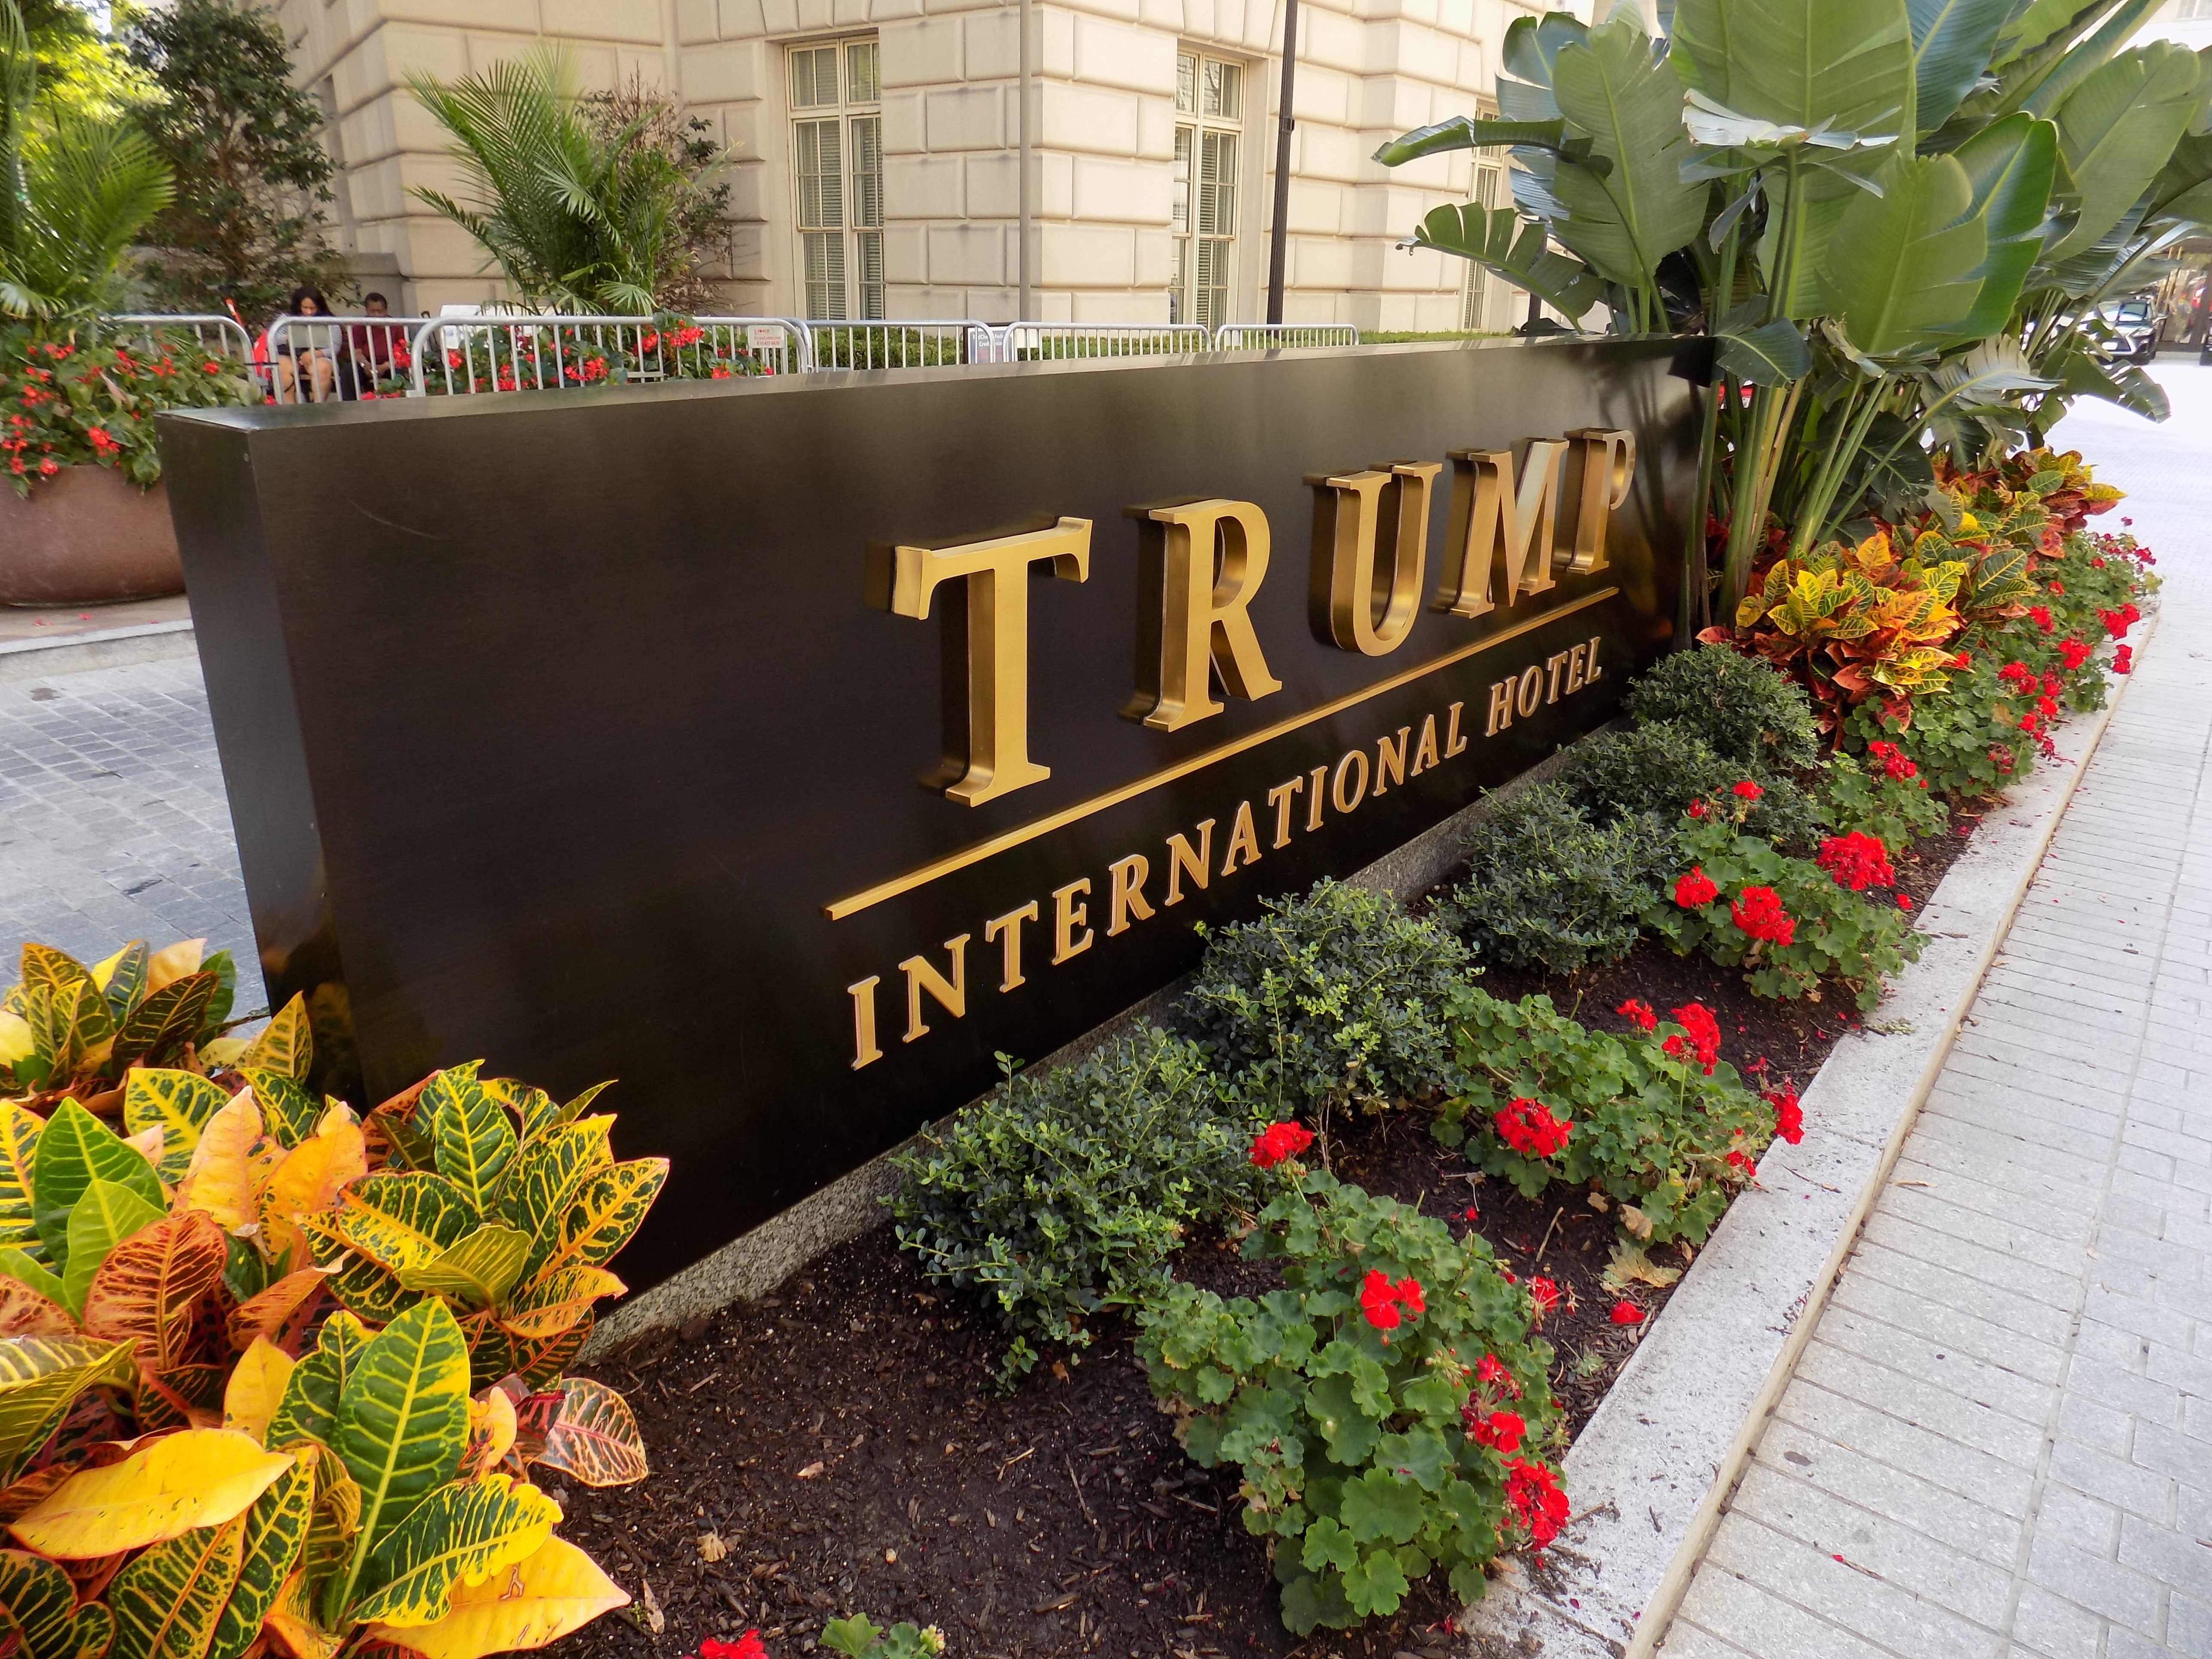 Trump Considers Disposing of D.C. Hotel to End Legal and Political Disputes